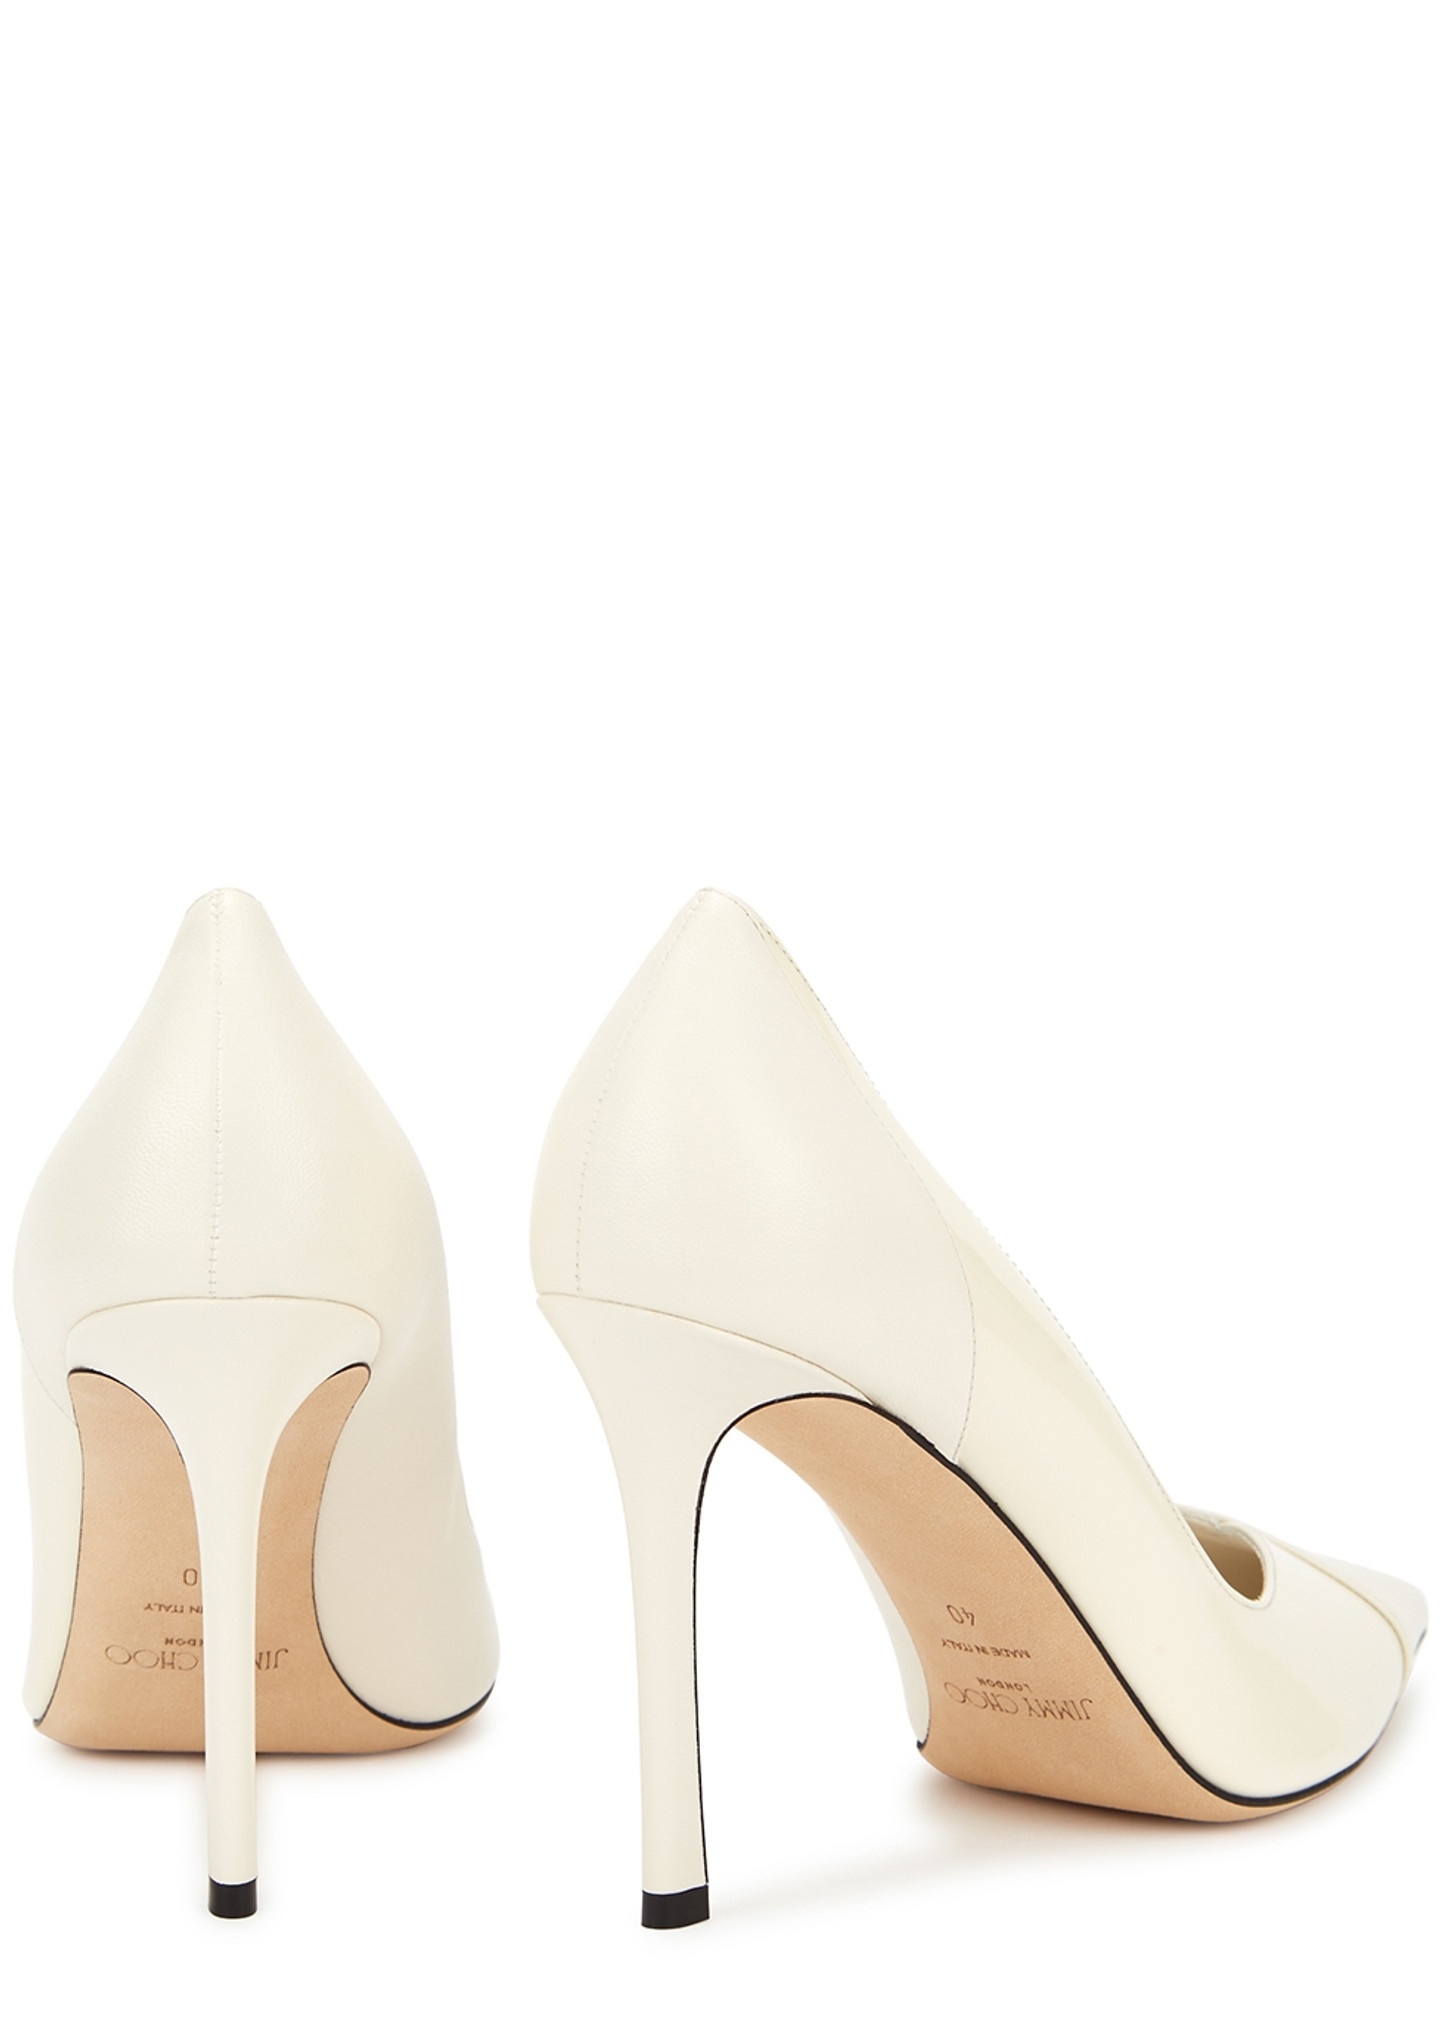 Cass 95 off-white leather pumps - 3